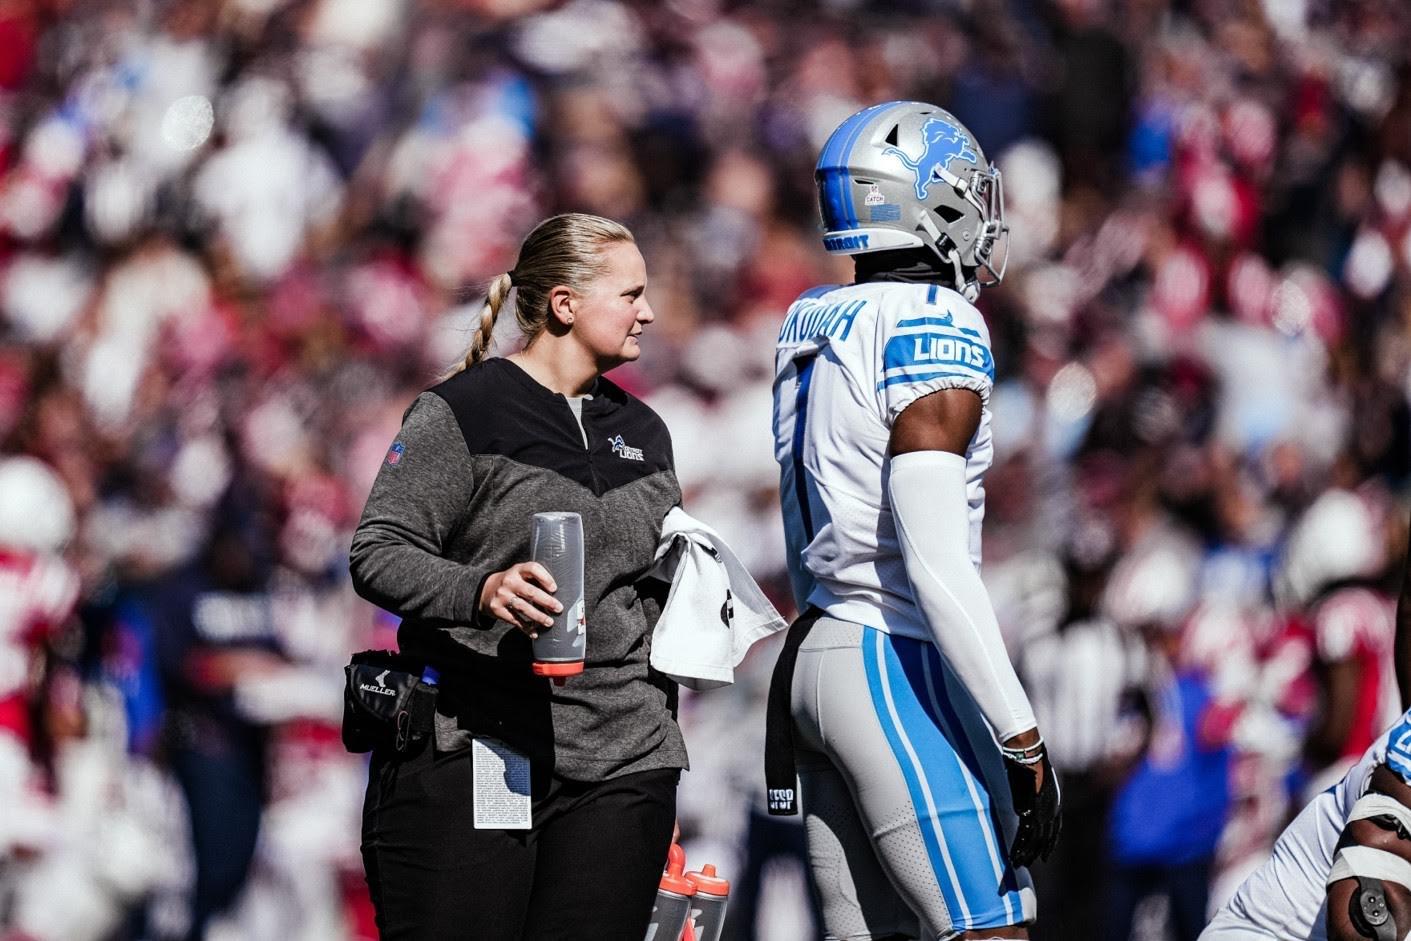 Brynn Johnson Working for the Detroit Lions